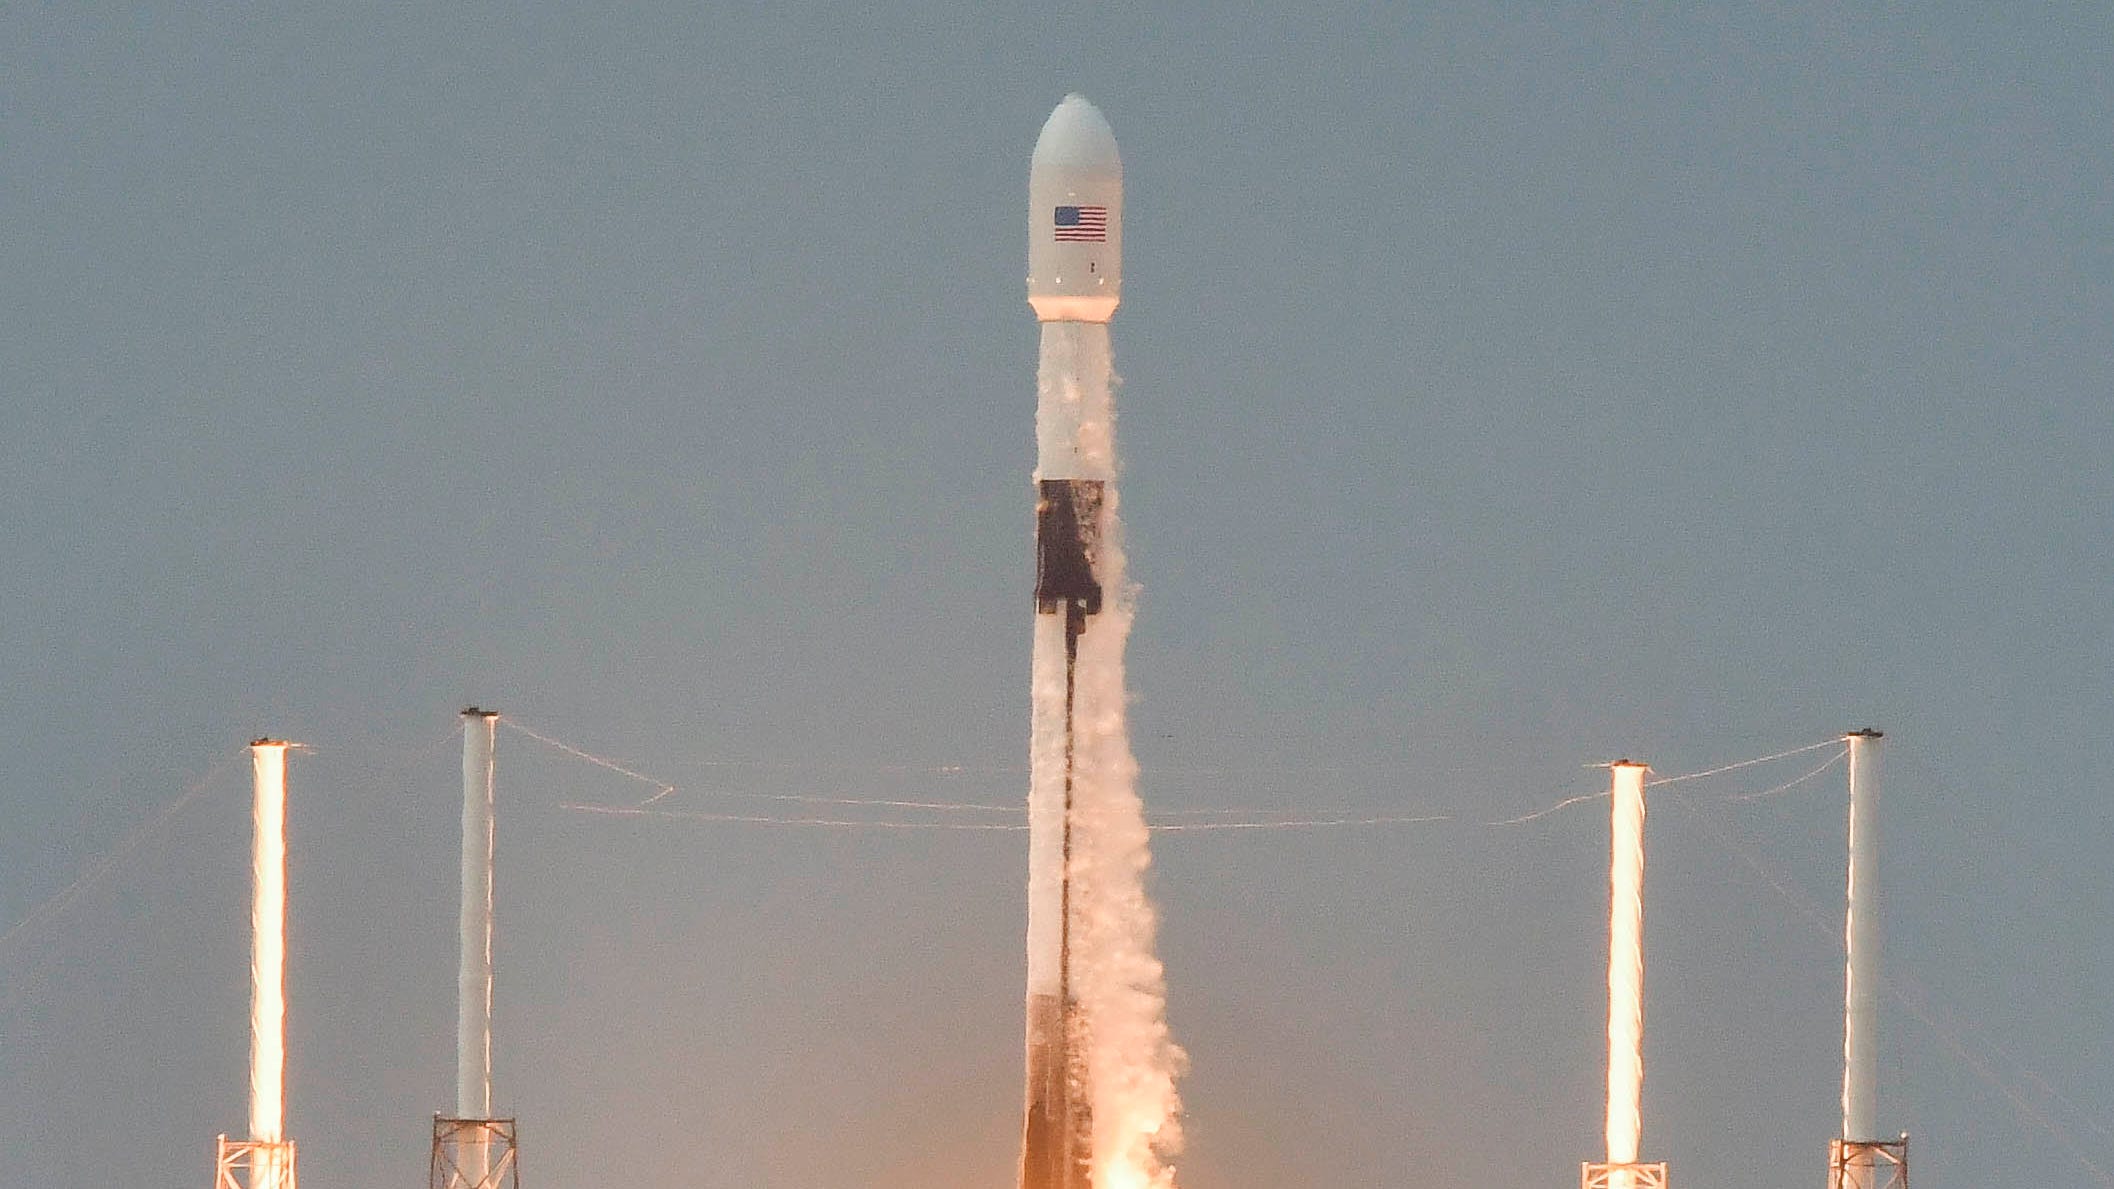 A SpaceX Falcon 9 rocket launches from Cape Canave